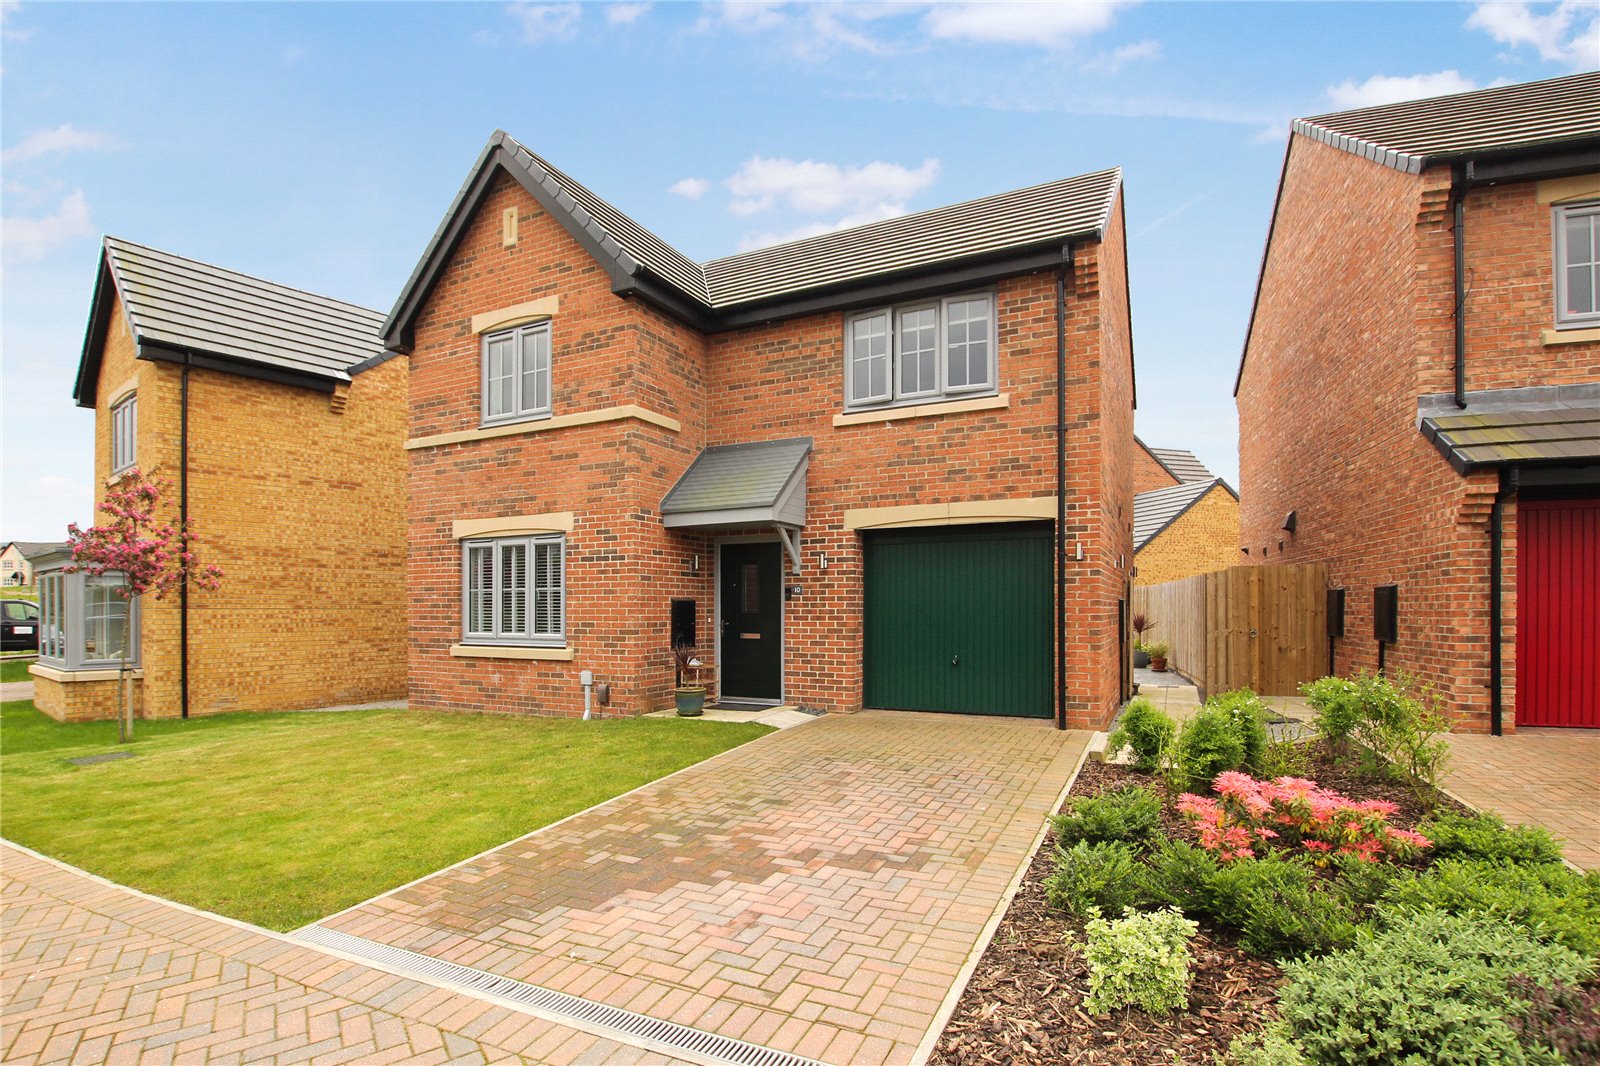 3 bed house for sale in Harvest Close, Stainsby Hall Farm 1